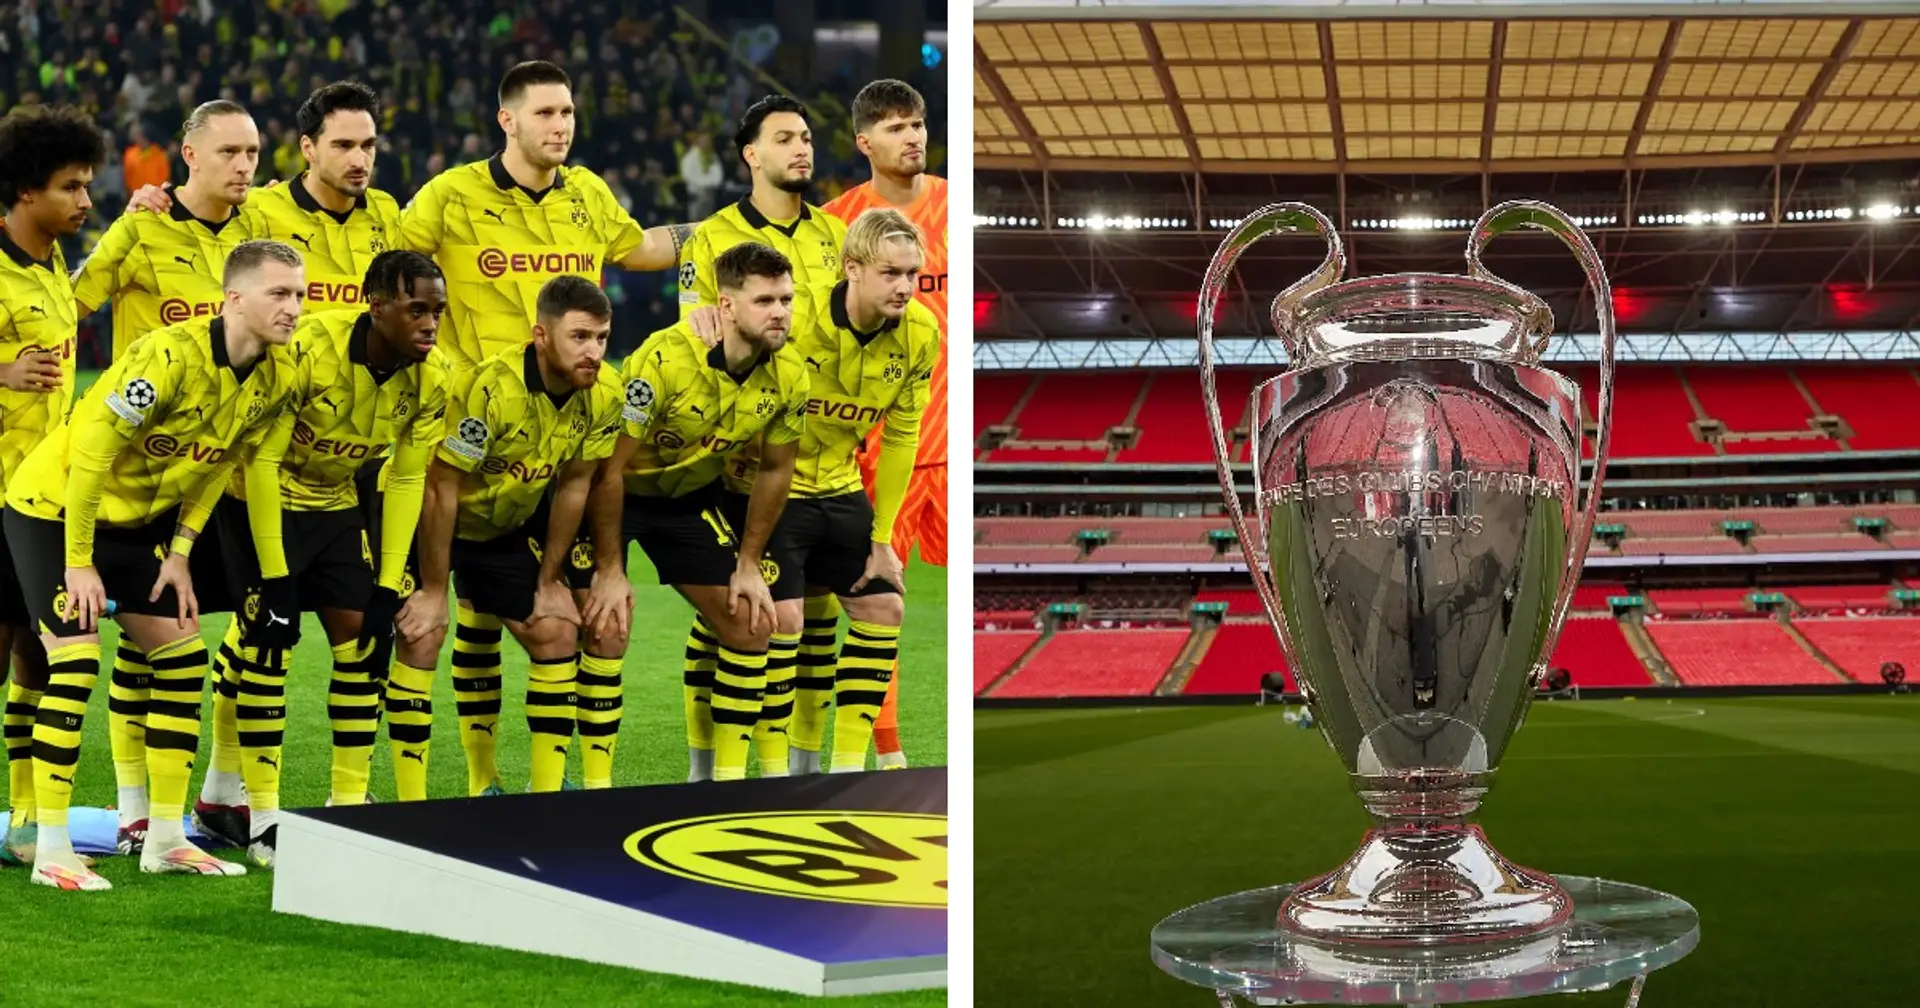 Borussia Dortmund will earn more money by losing Champions League final to Real Madrid than if they win - explained